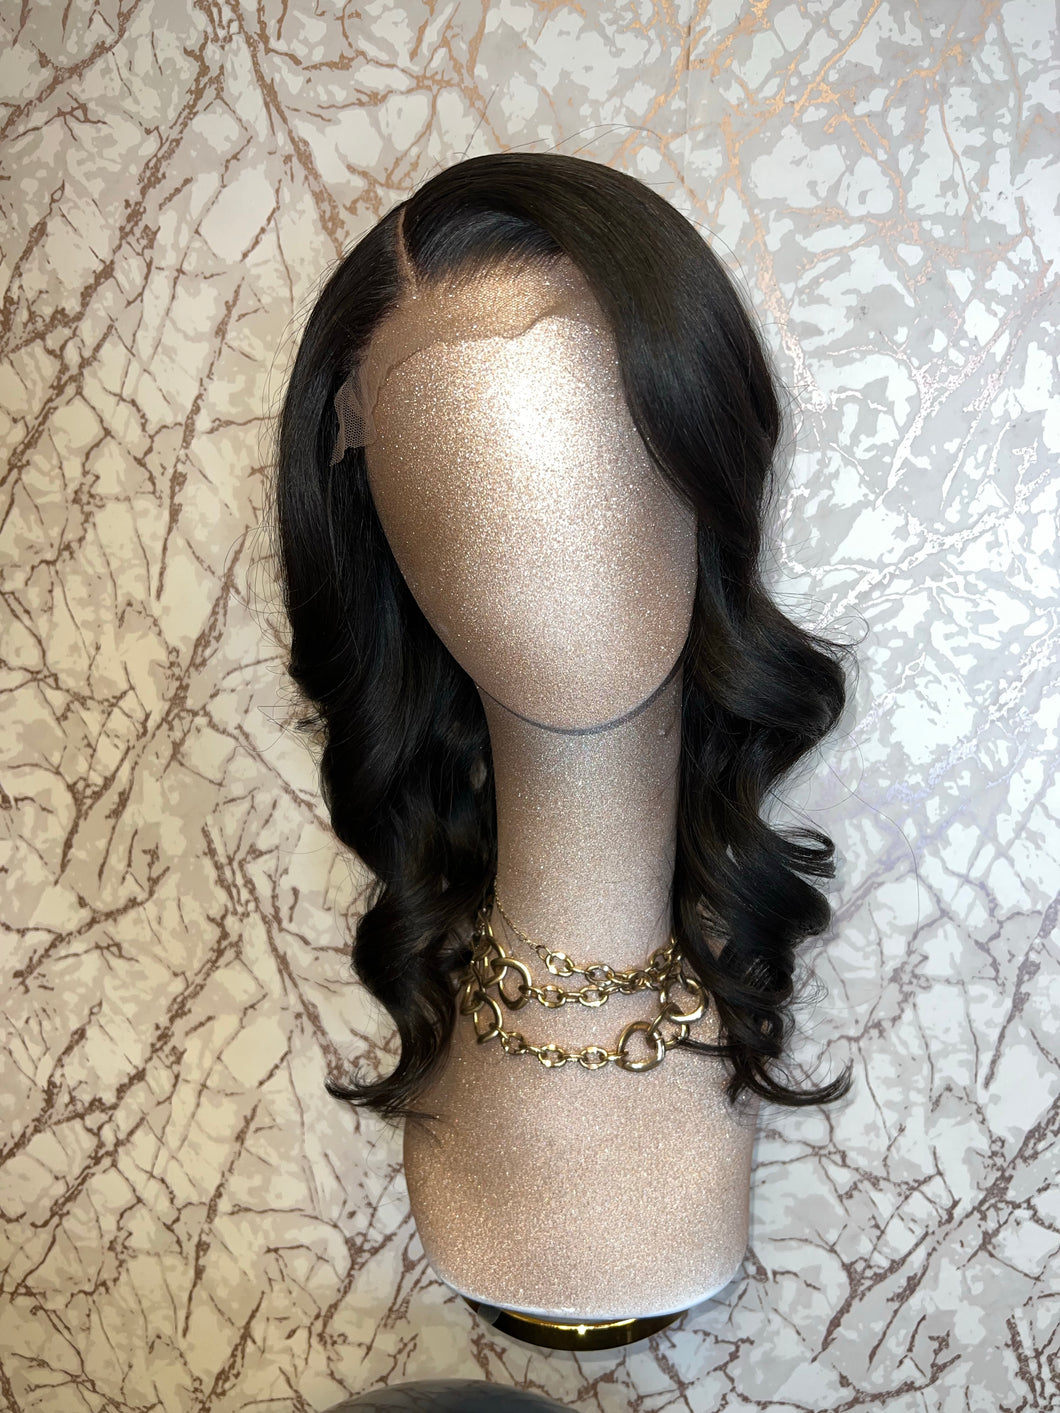 5x5 Natural Lace Unit Textured Straight (my favorite texture) 18” Natural color Right side part No baby hair